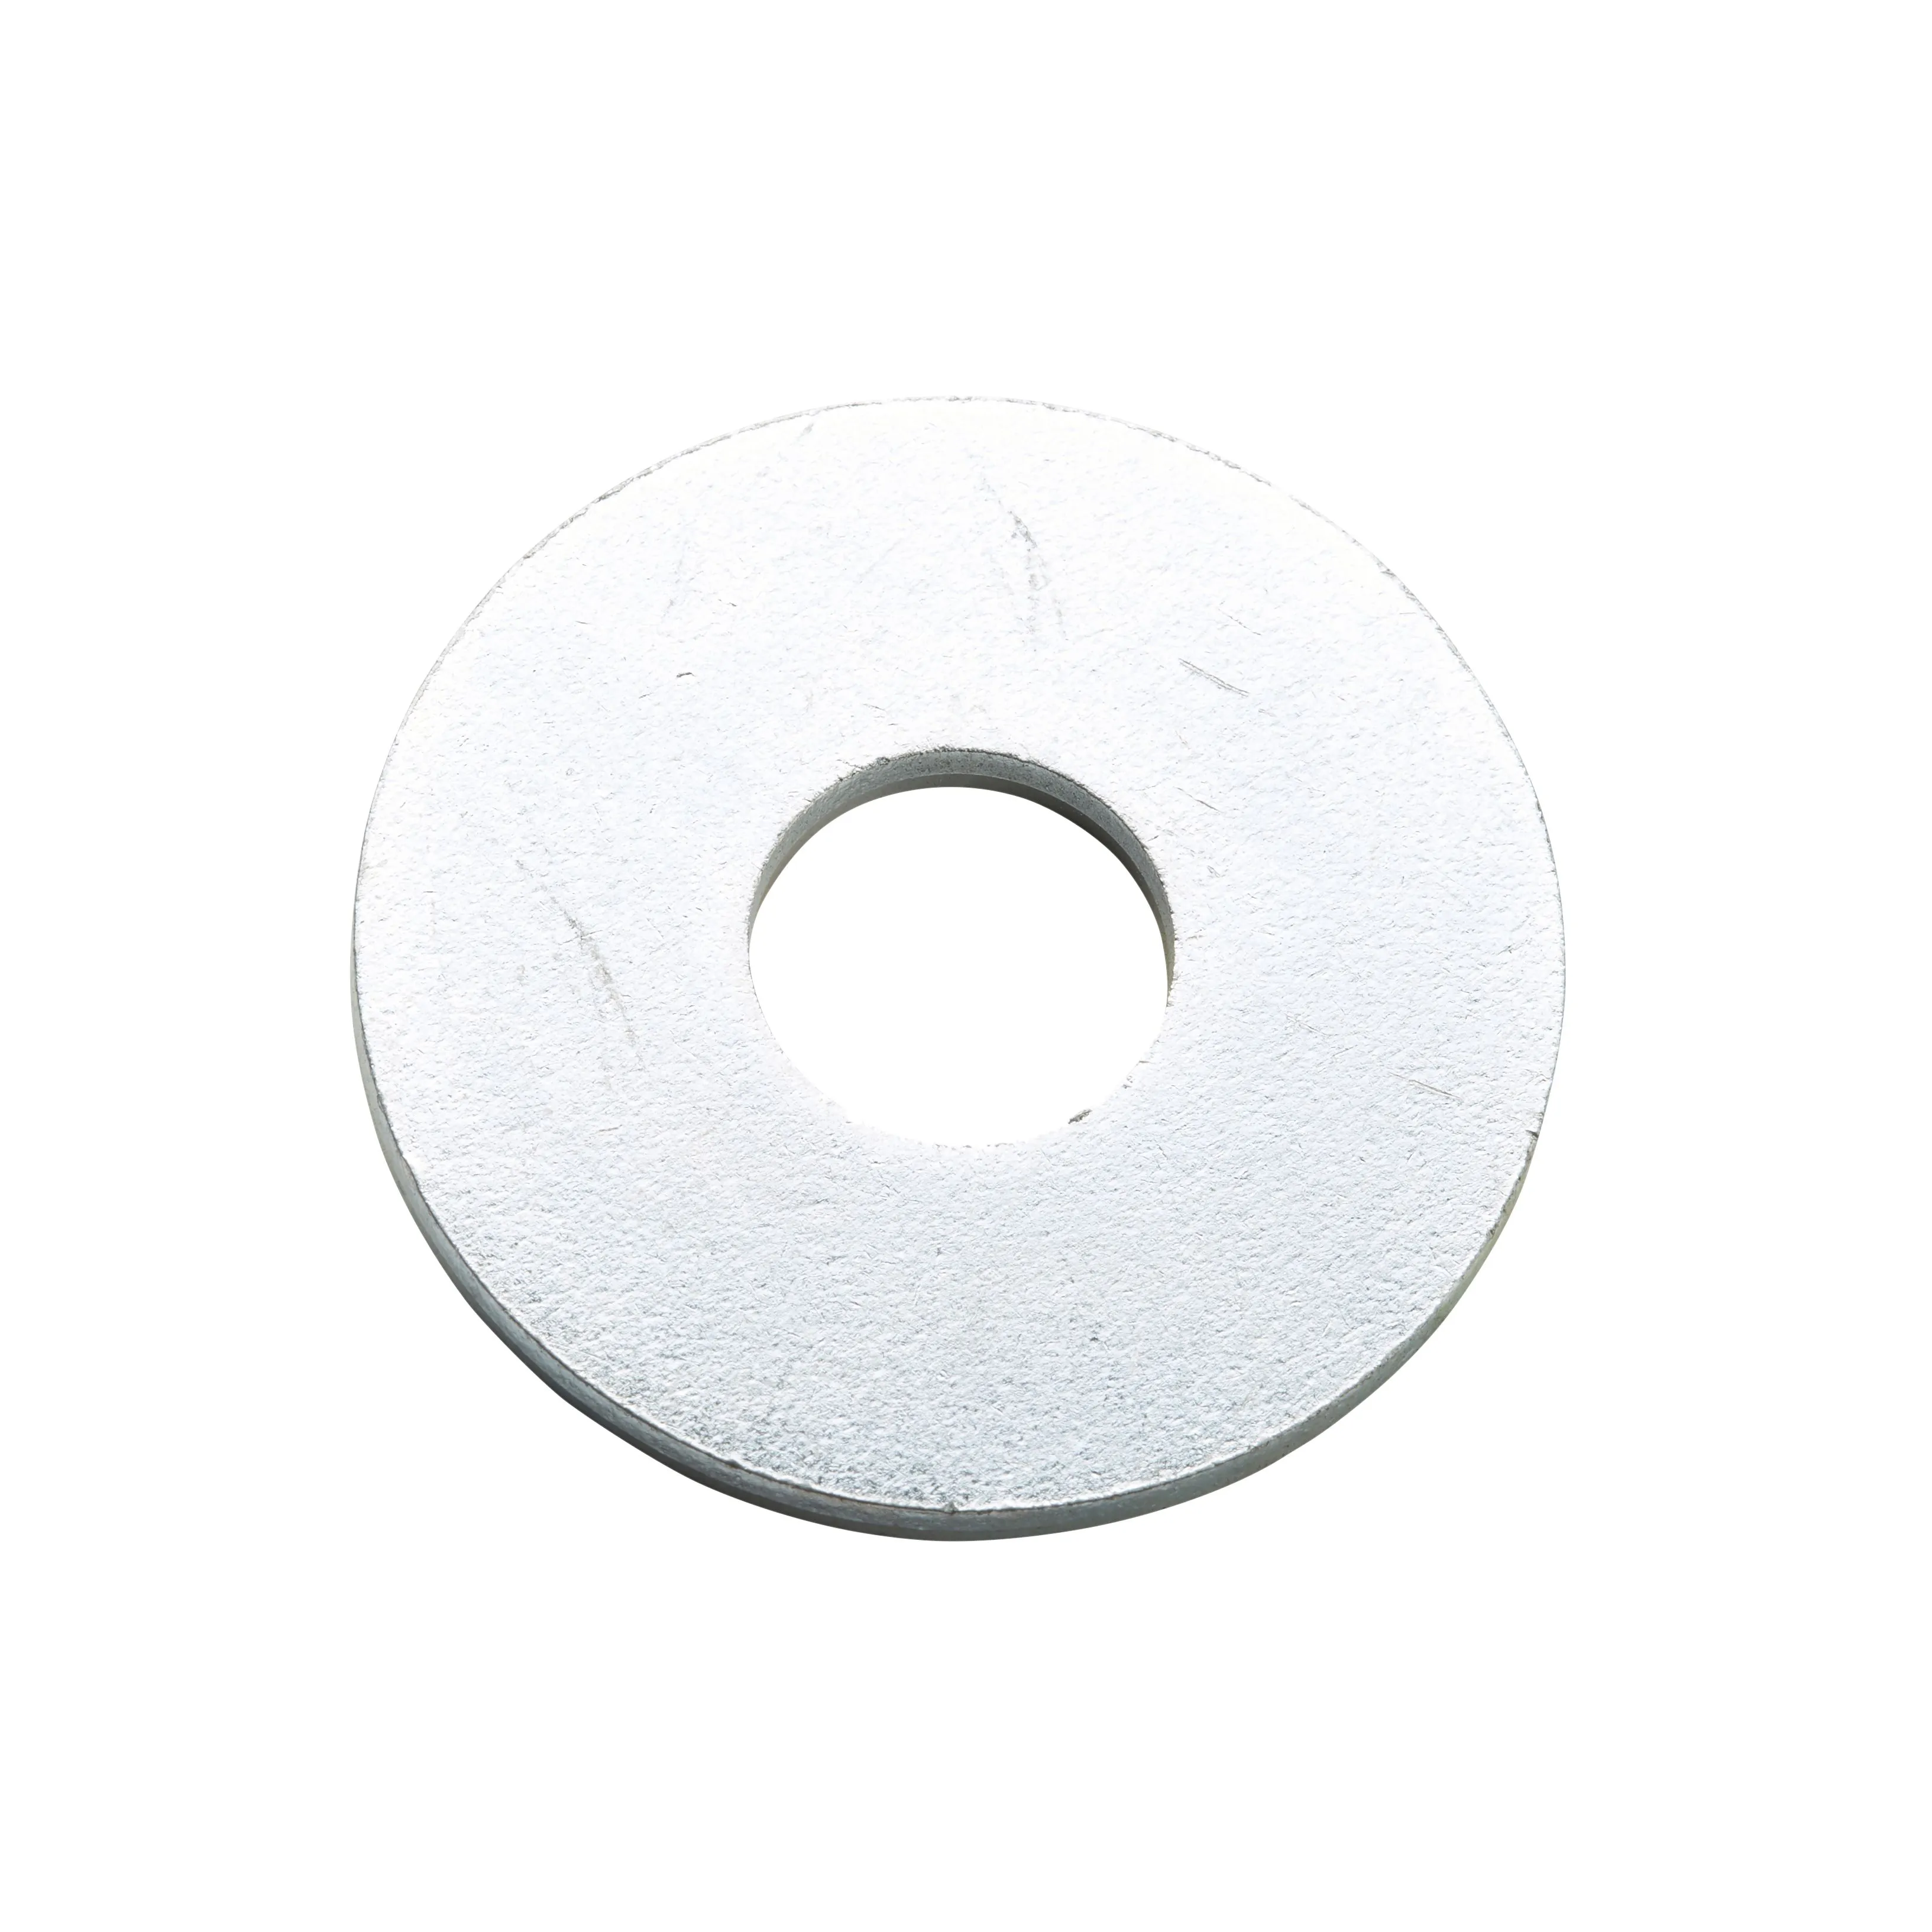 Diall M10 Carbon steel Flat Washer, Pack of 100